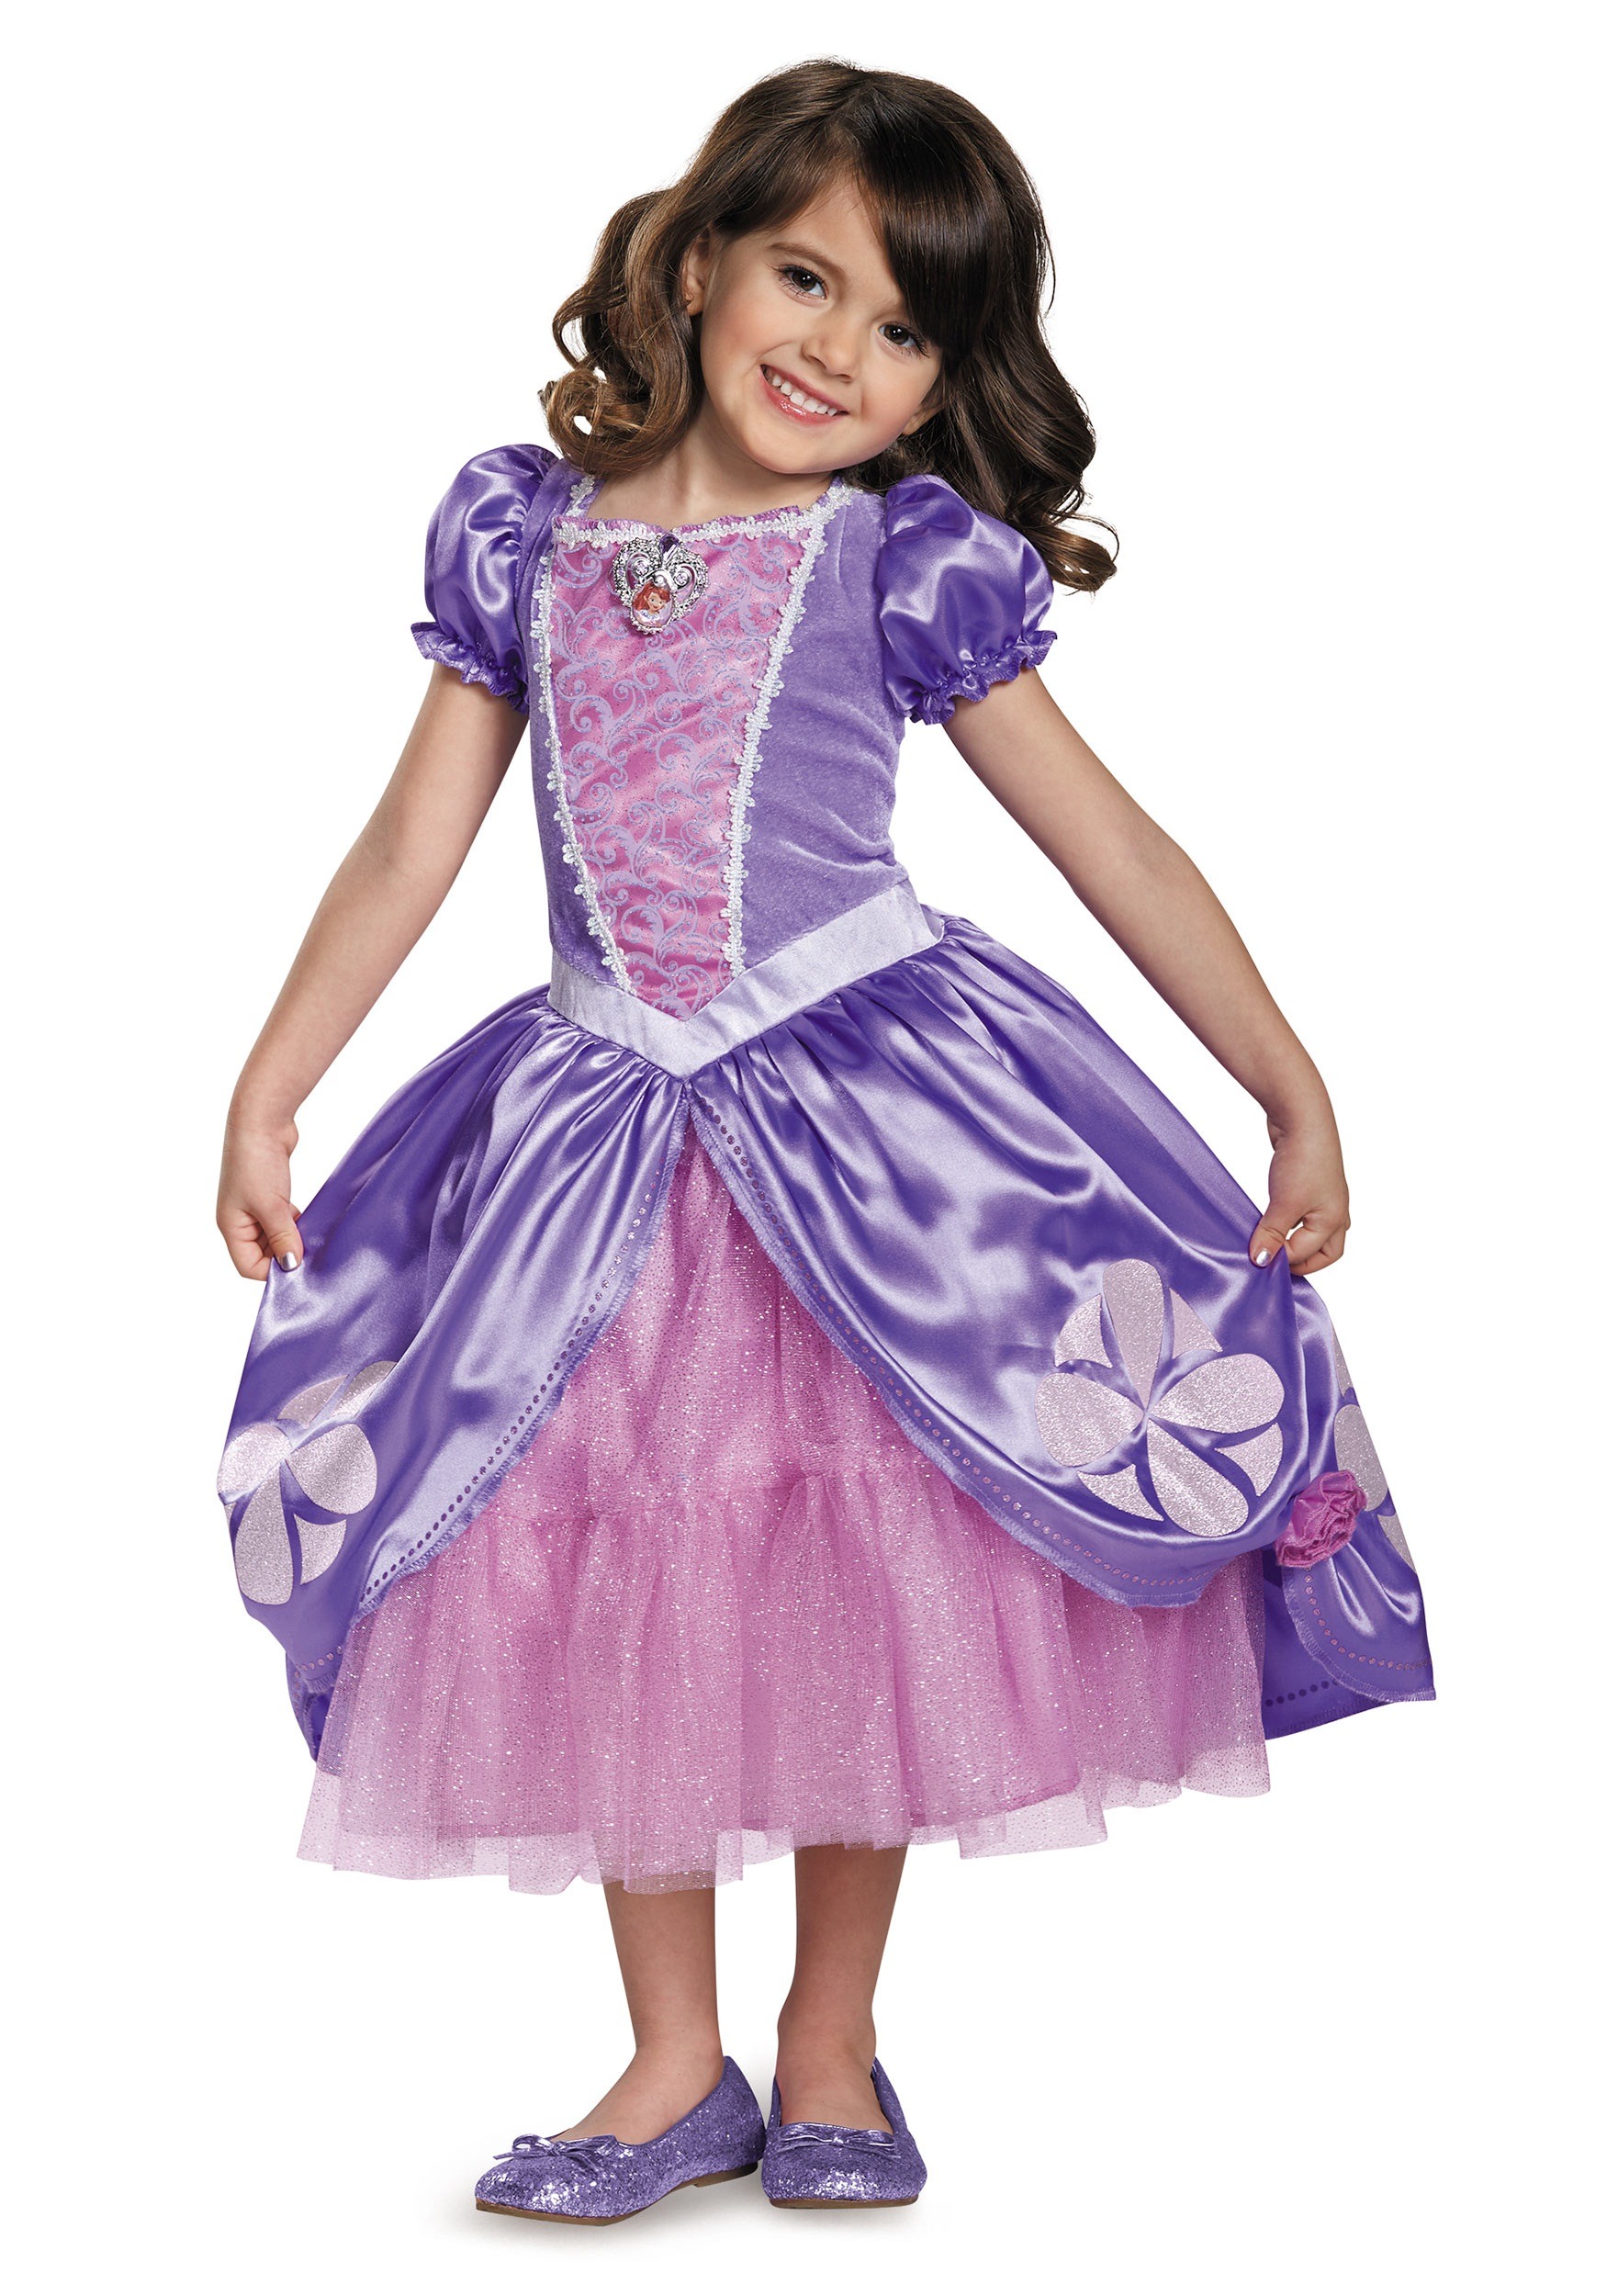 Photos - Fancy Dress Deluxe Disguise  Sofia The First Next Chapter Costume Dress for Girls Purpl 